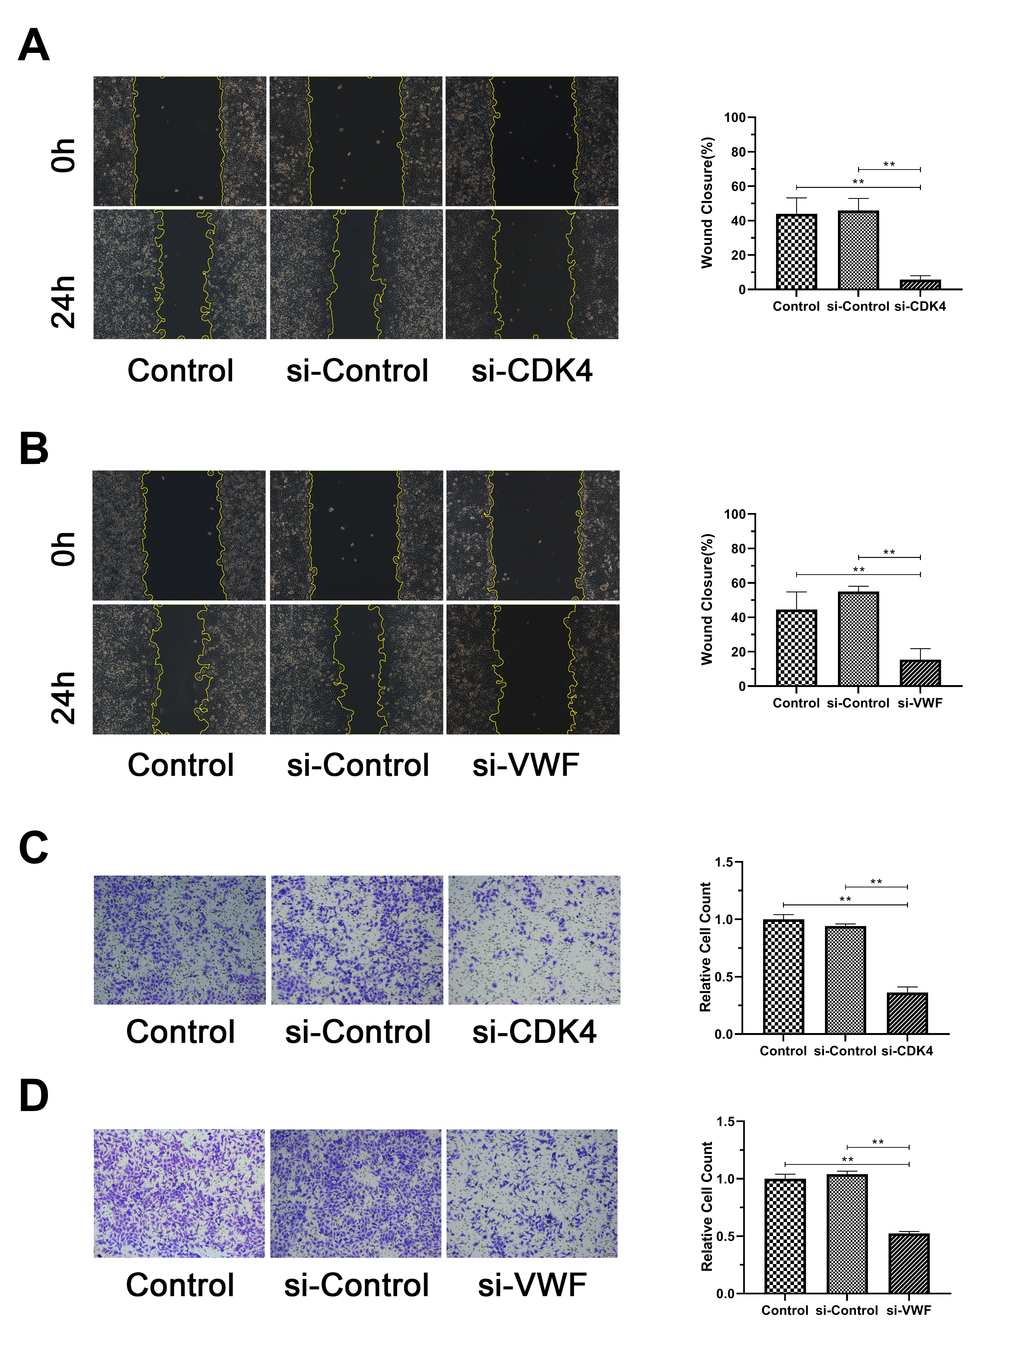 Inactivation of CDK4 or VWF inhibits the invasion and migration of melanoma. (A, B) Closure percentage of the si-CDK4 or si-VWF group was significantly lower than that of the Control and si-Control groups. (C, D) Relative count of invading cells of the si-CDK4 or si-VWF group was significantly lower than that of the Control and si-Control groups. Asterisks indicate statistically significant difference (**: p